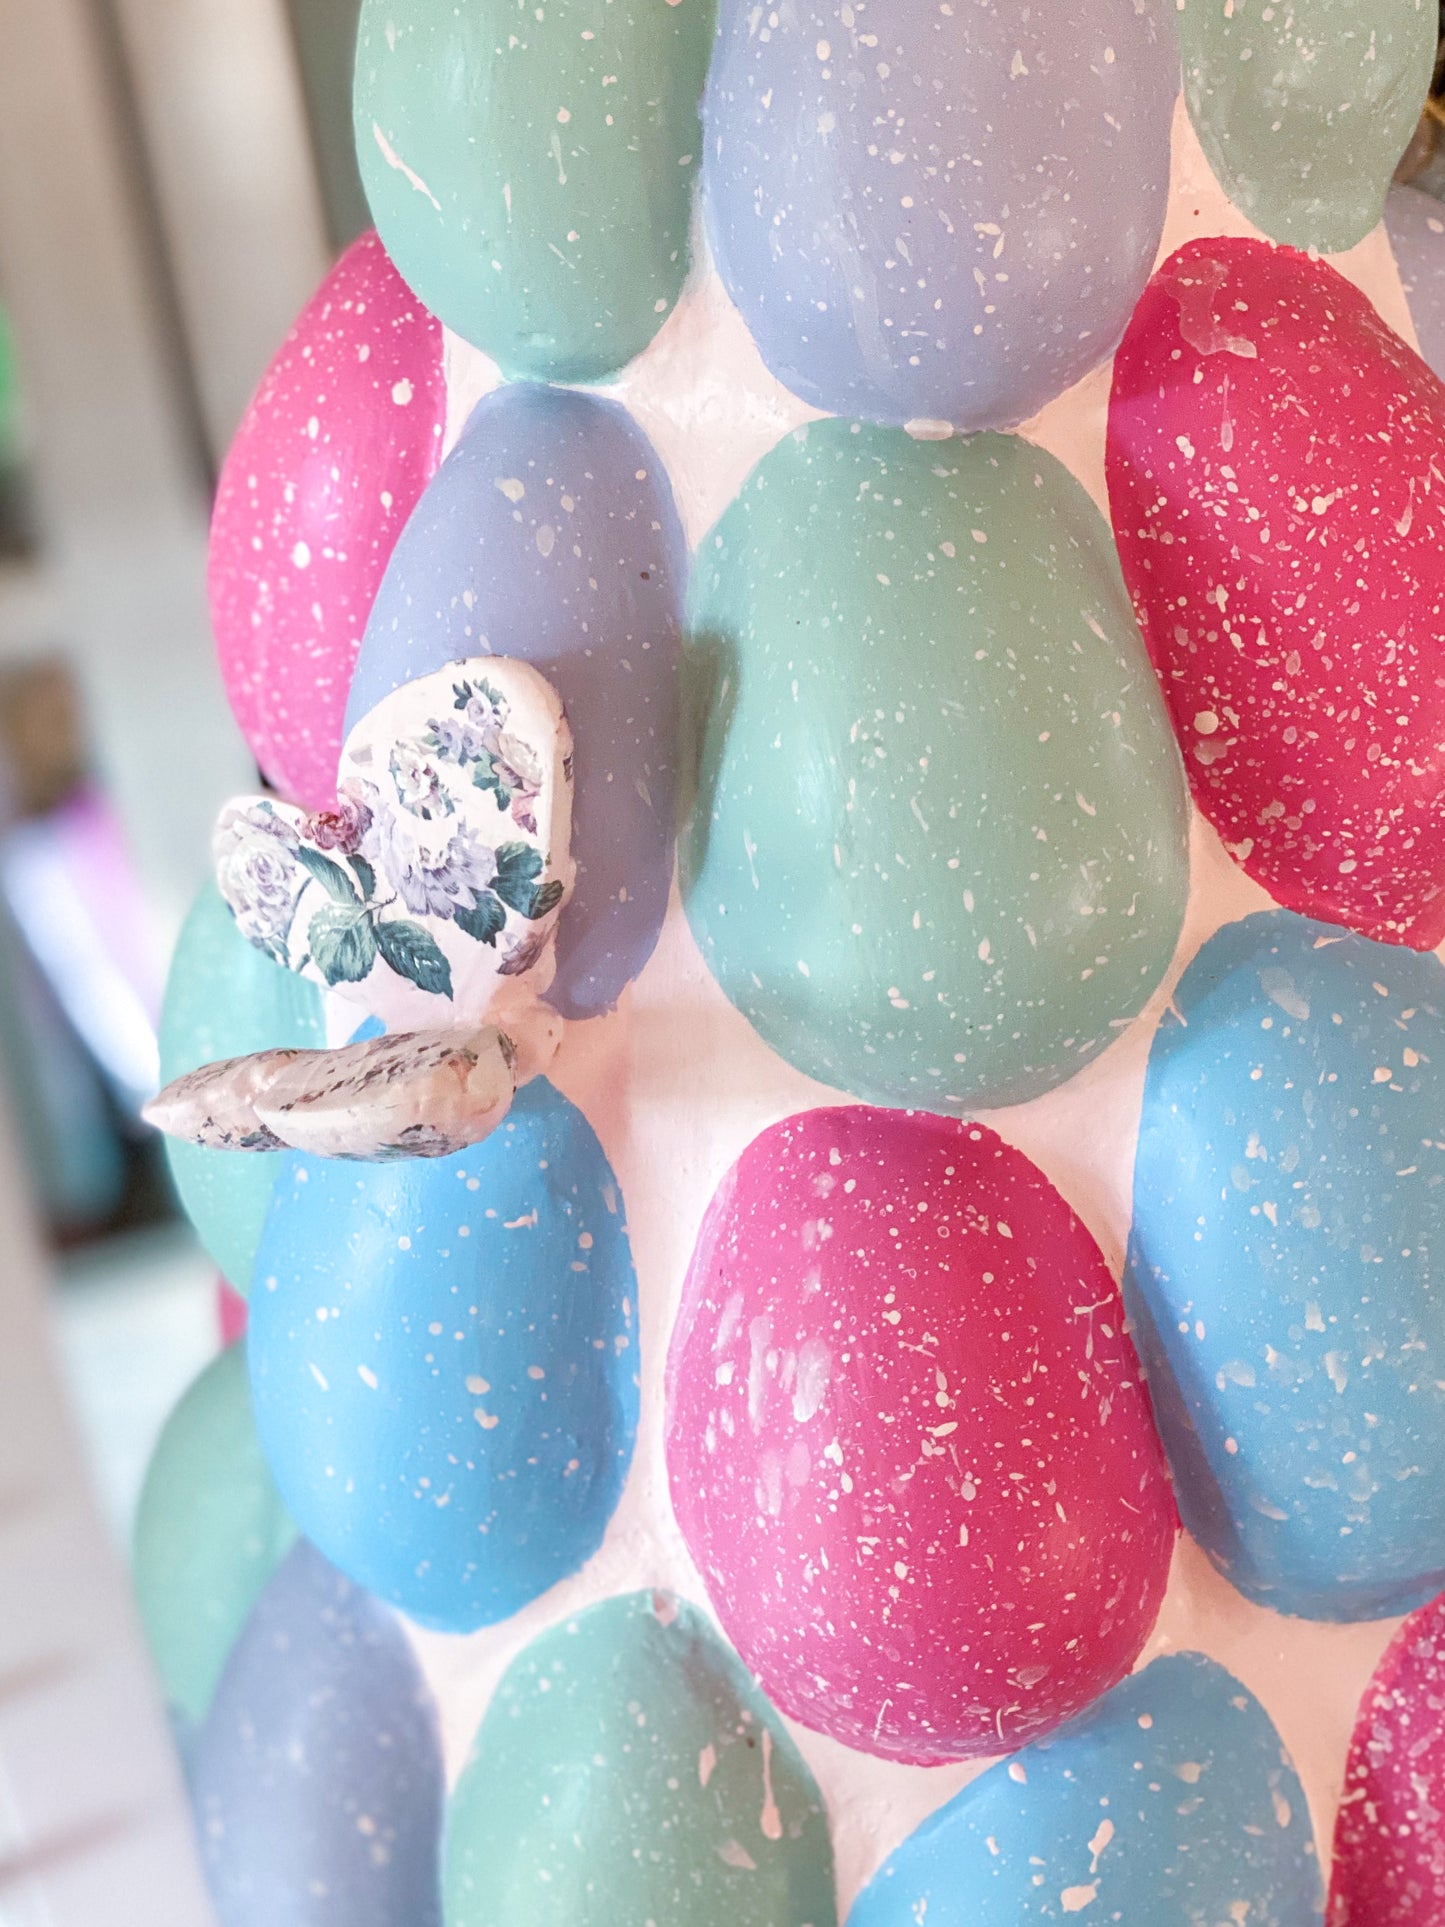 Bespoke Large Hand Painted Egg Tree in Urn